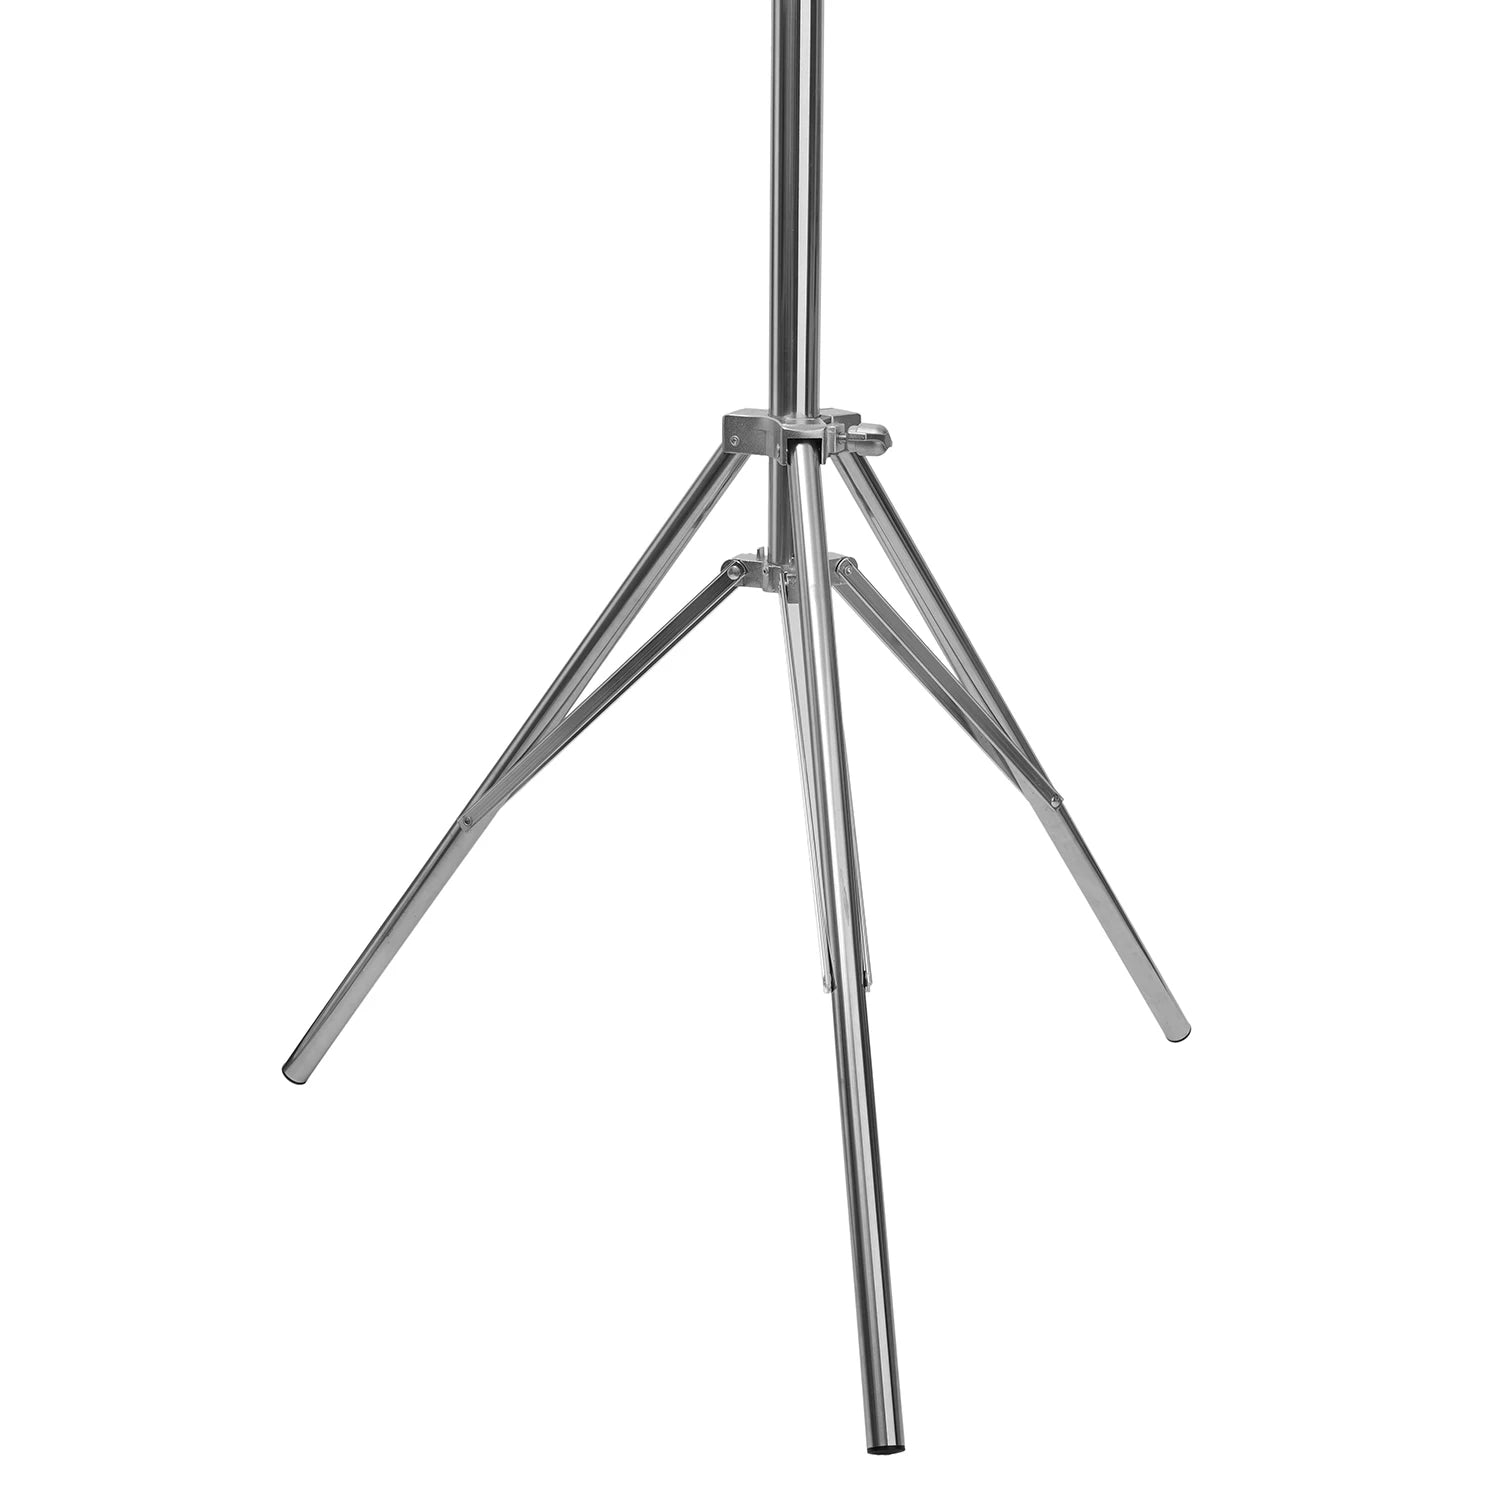 280cm Adjustable Stainless Steel Light Stand: Heavy-Duty, Universal Fit